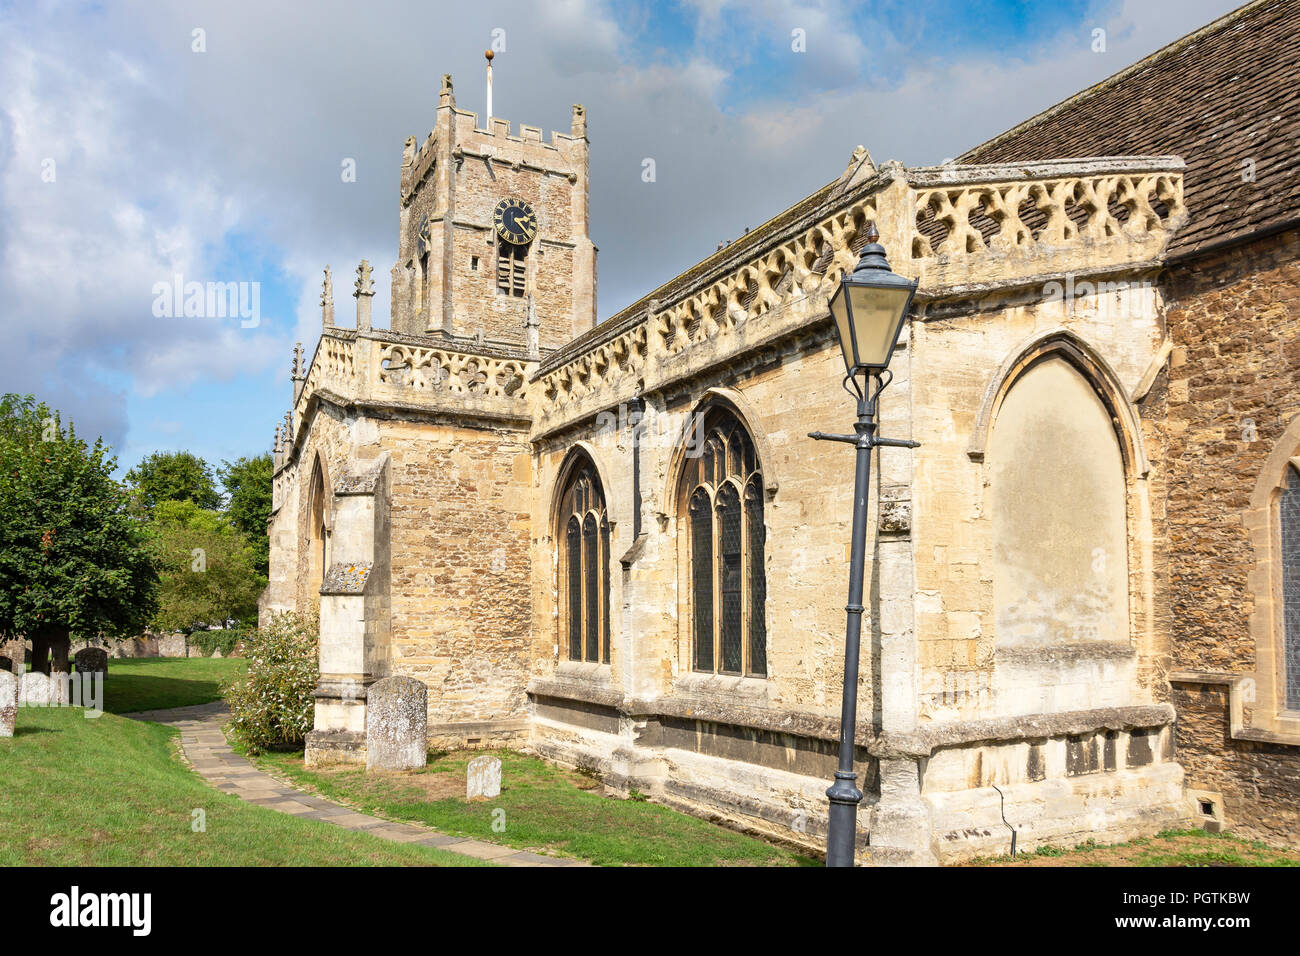 St Michael's Church, Highworth, Wiltshire, Angleterre, Royaume-Uni Banque D'Images